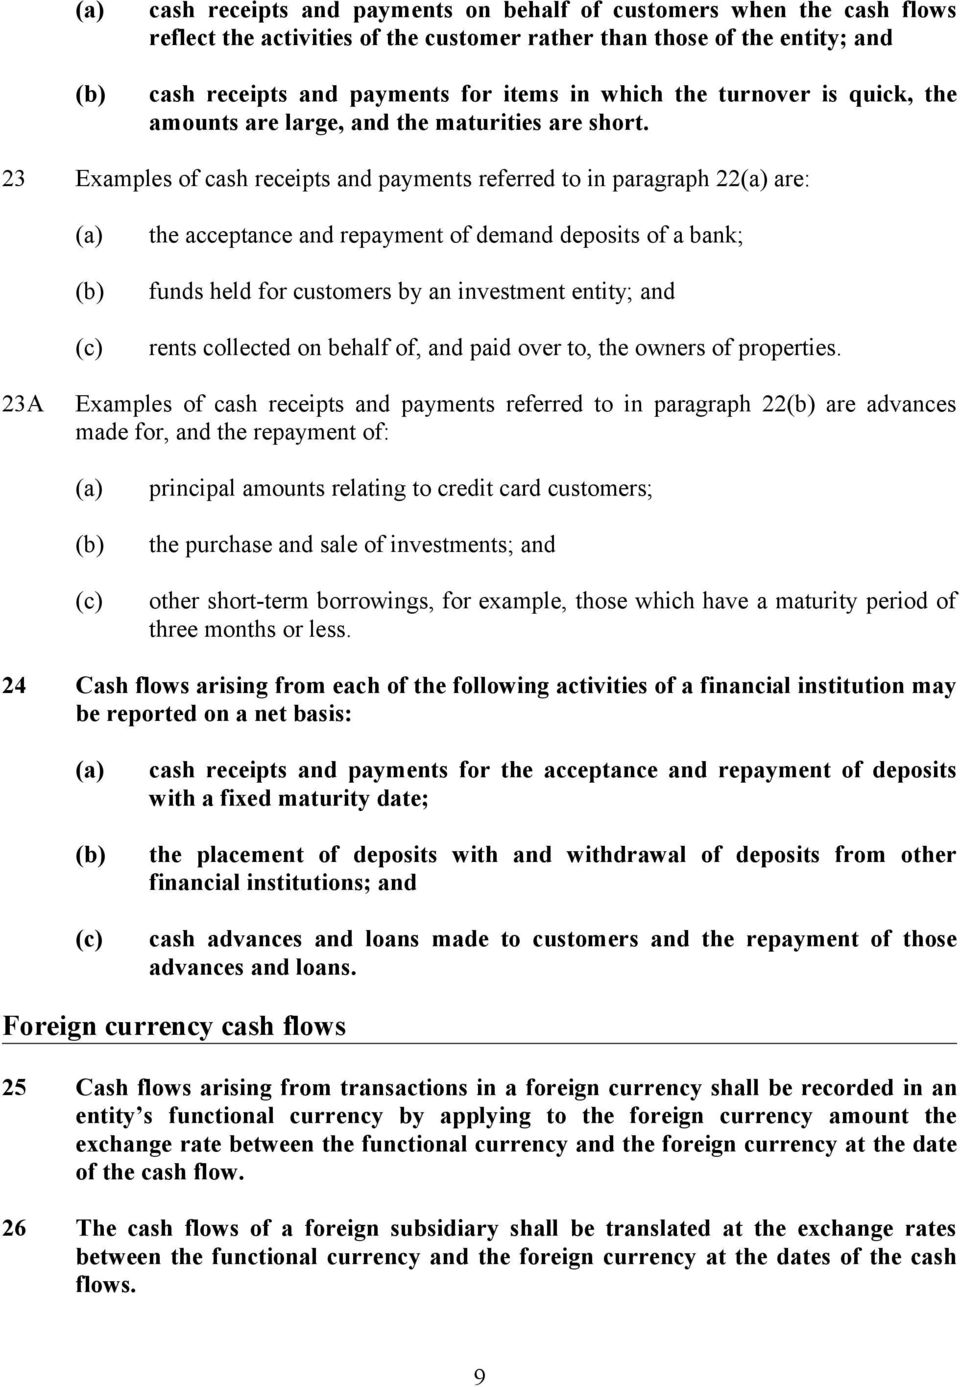 23 Examples of cash receipts and payments referred to in paragraph 22 are: (c) the acceptance and repayment of demand deposits of a bank; funds held for customers by an investment entity; and rents